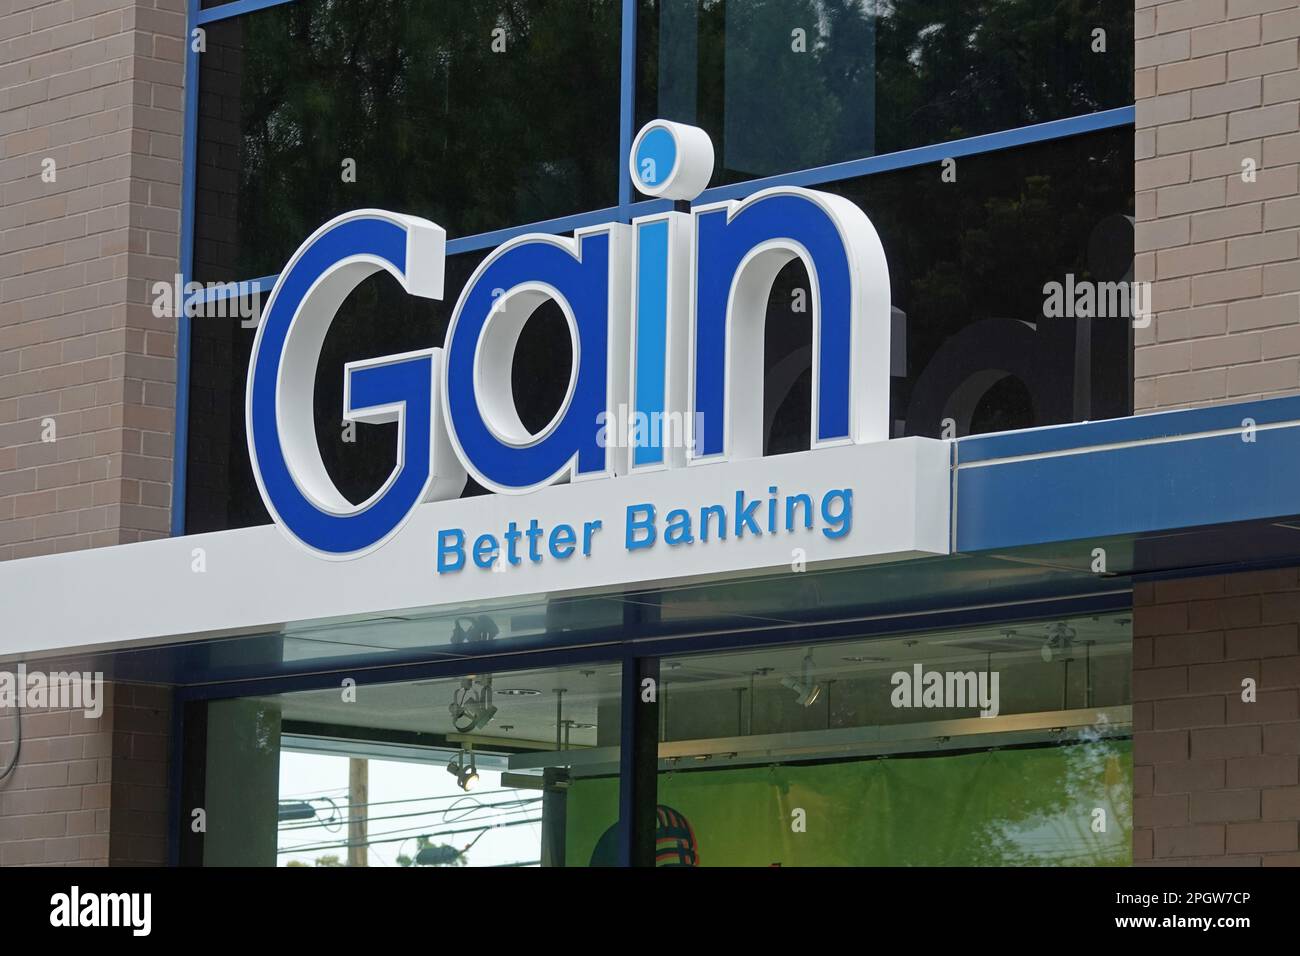 Burbank, California / USA - March 19, 2023: A sign for Gain Federal Credit Union is shown with the slogan “Better Banking” on the building exterior. Stock Photo